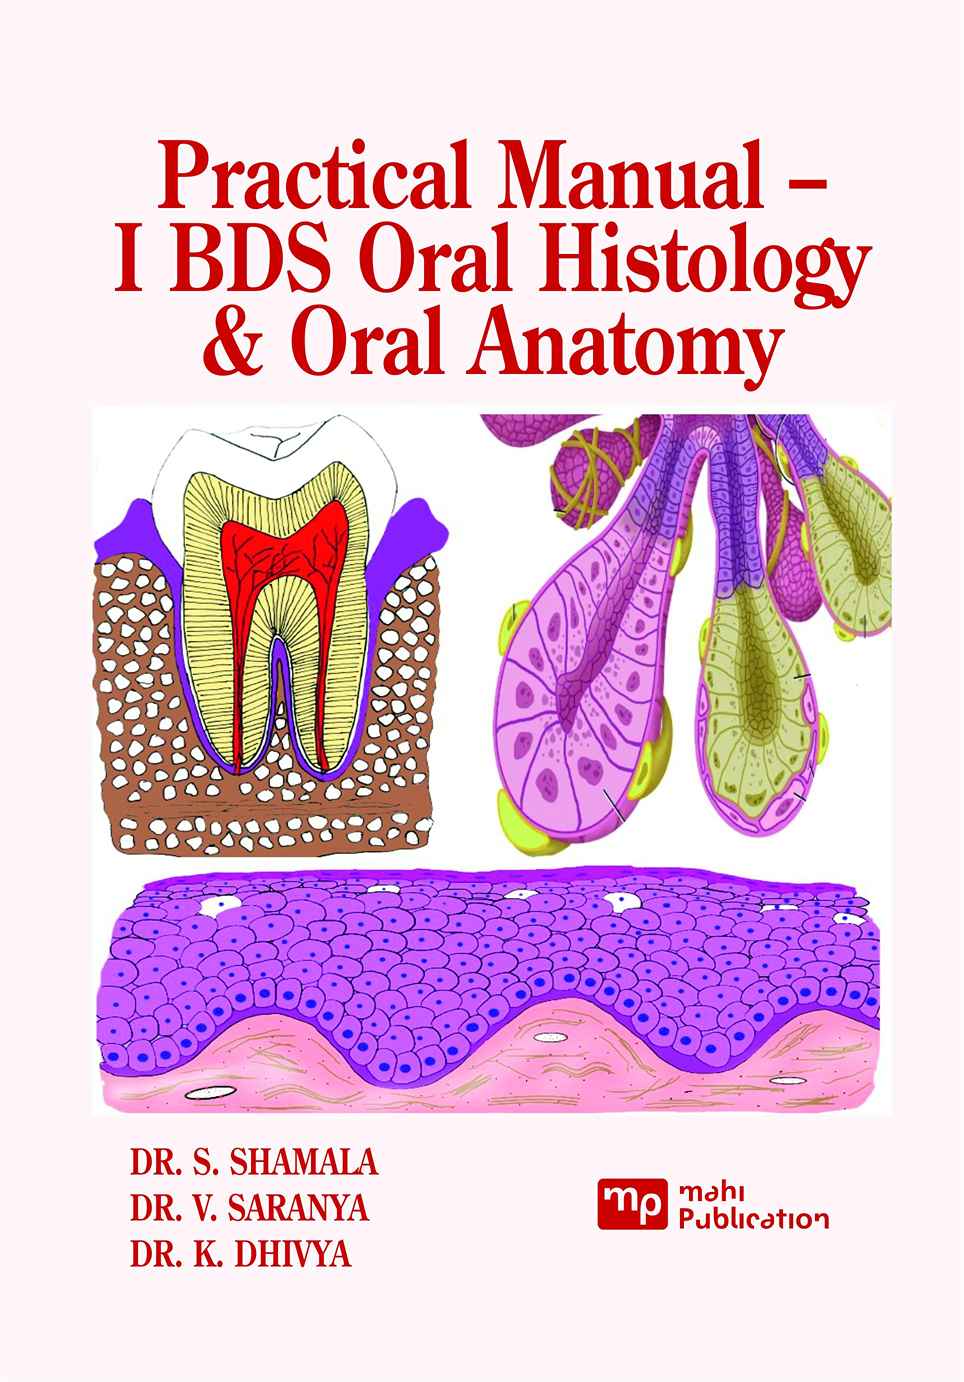 Practical Manual – I BDS Oral Histology & Oral Anatomy